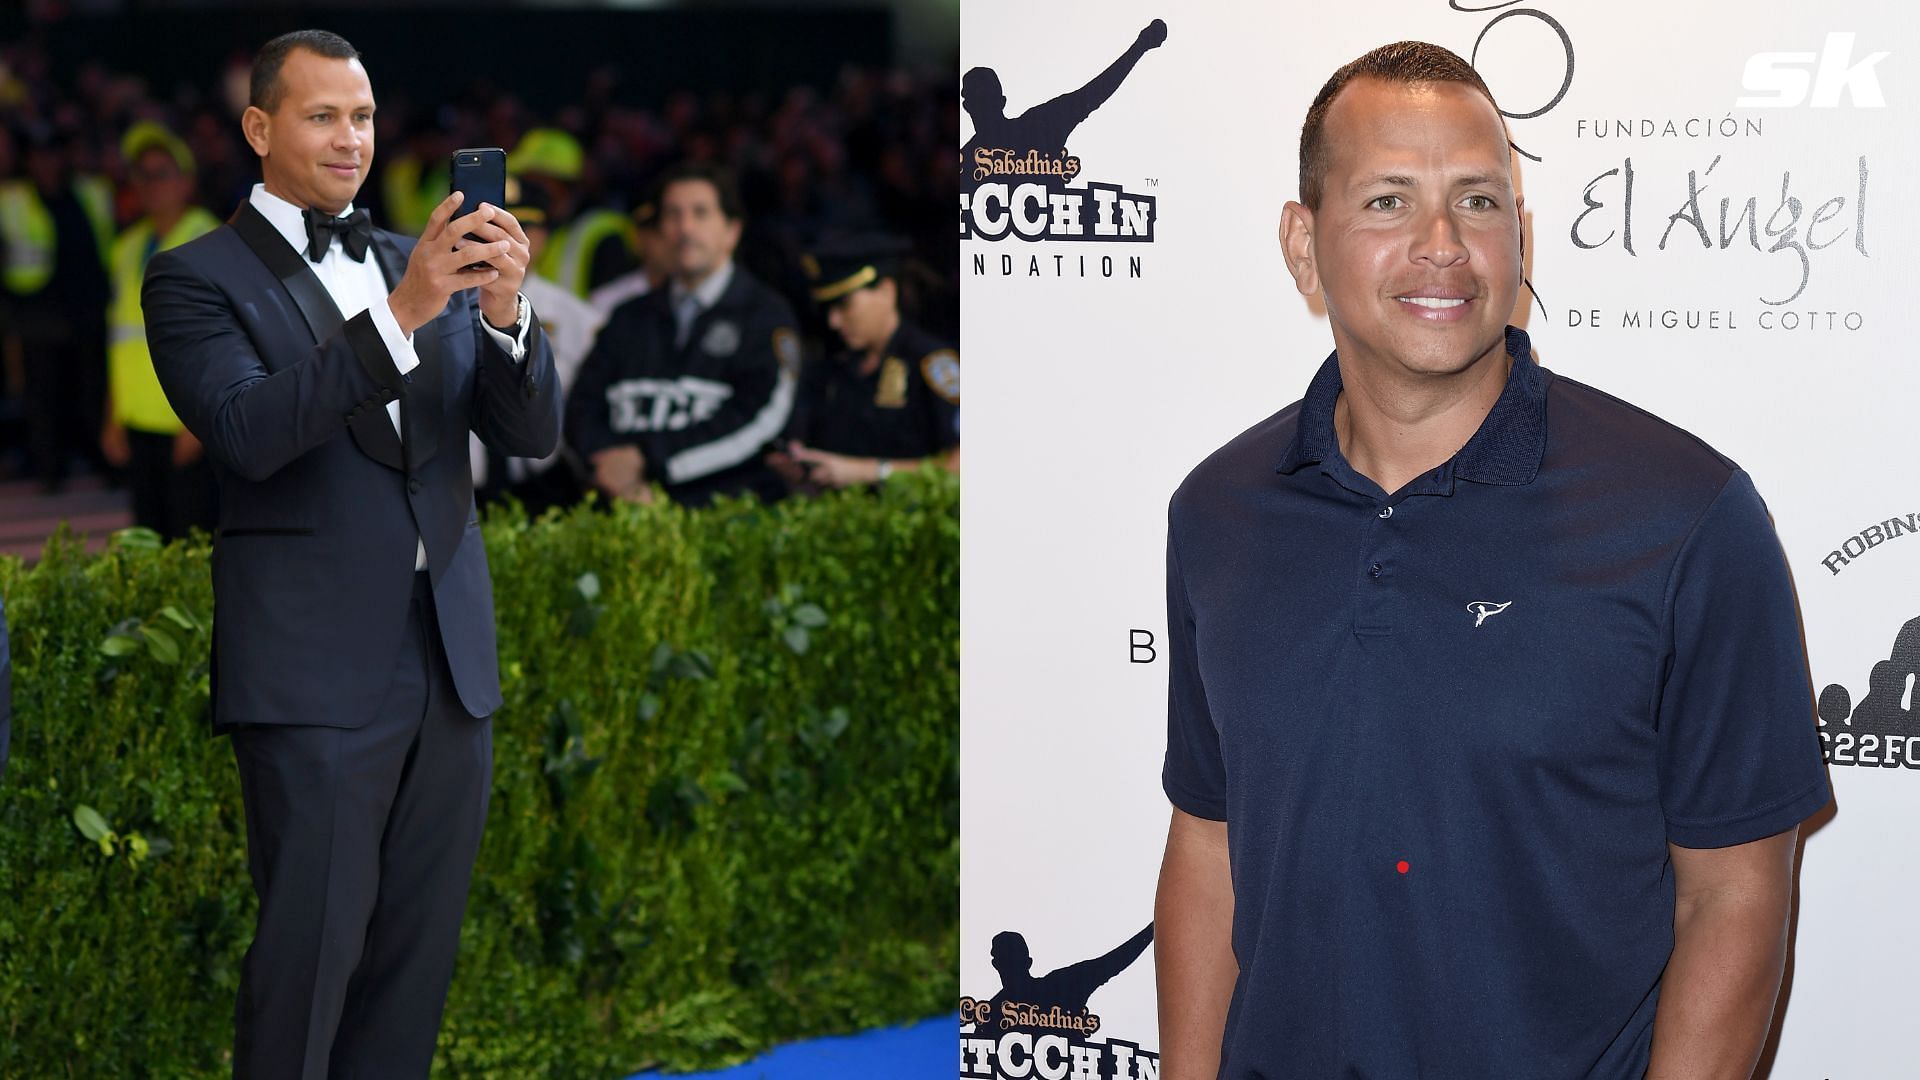 Alex Rodriguez is keeping connections to his roots strong this holiday season